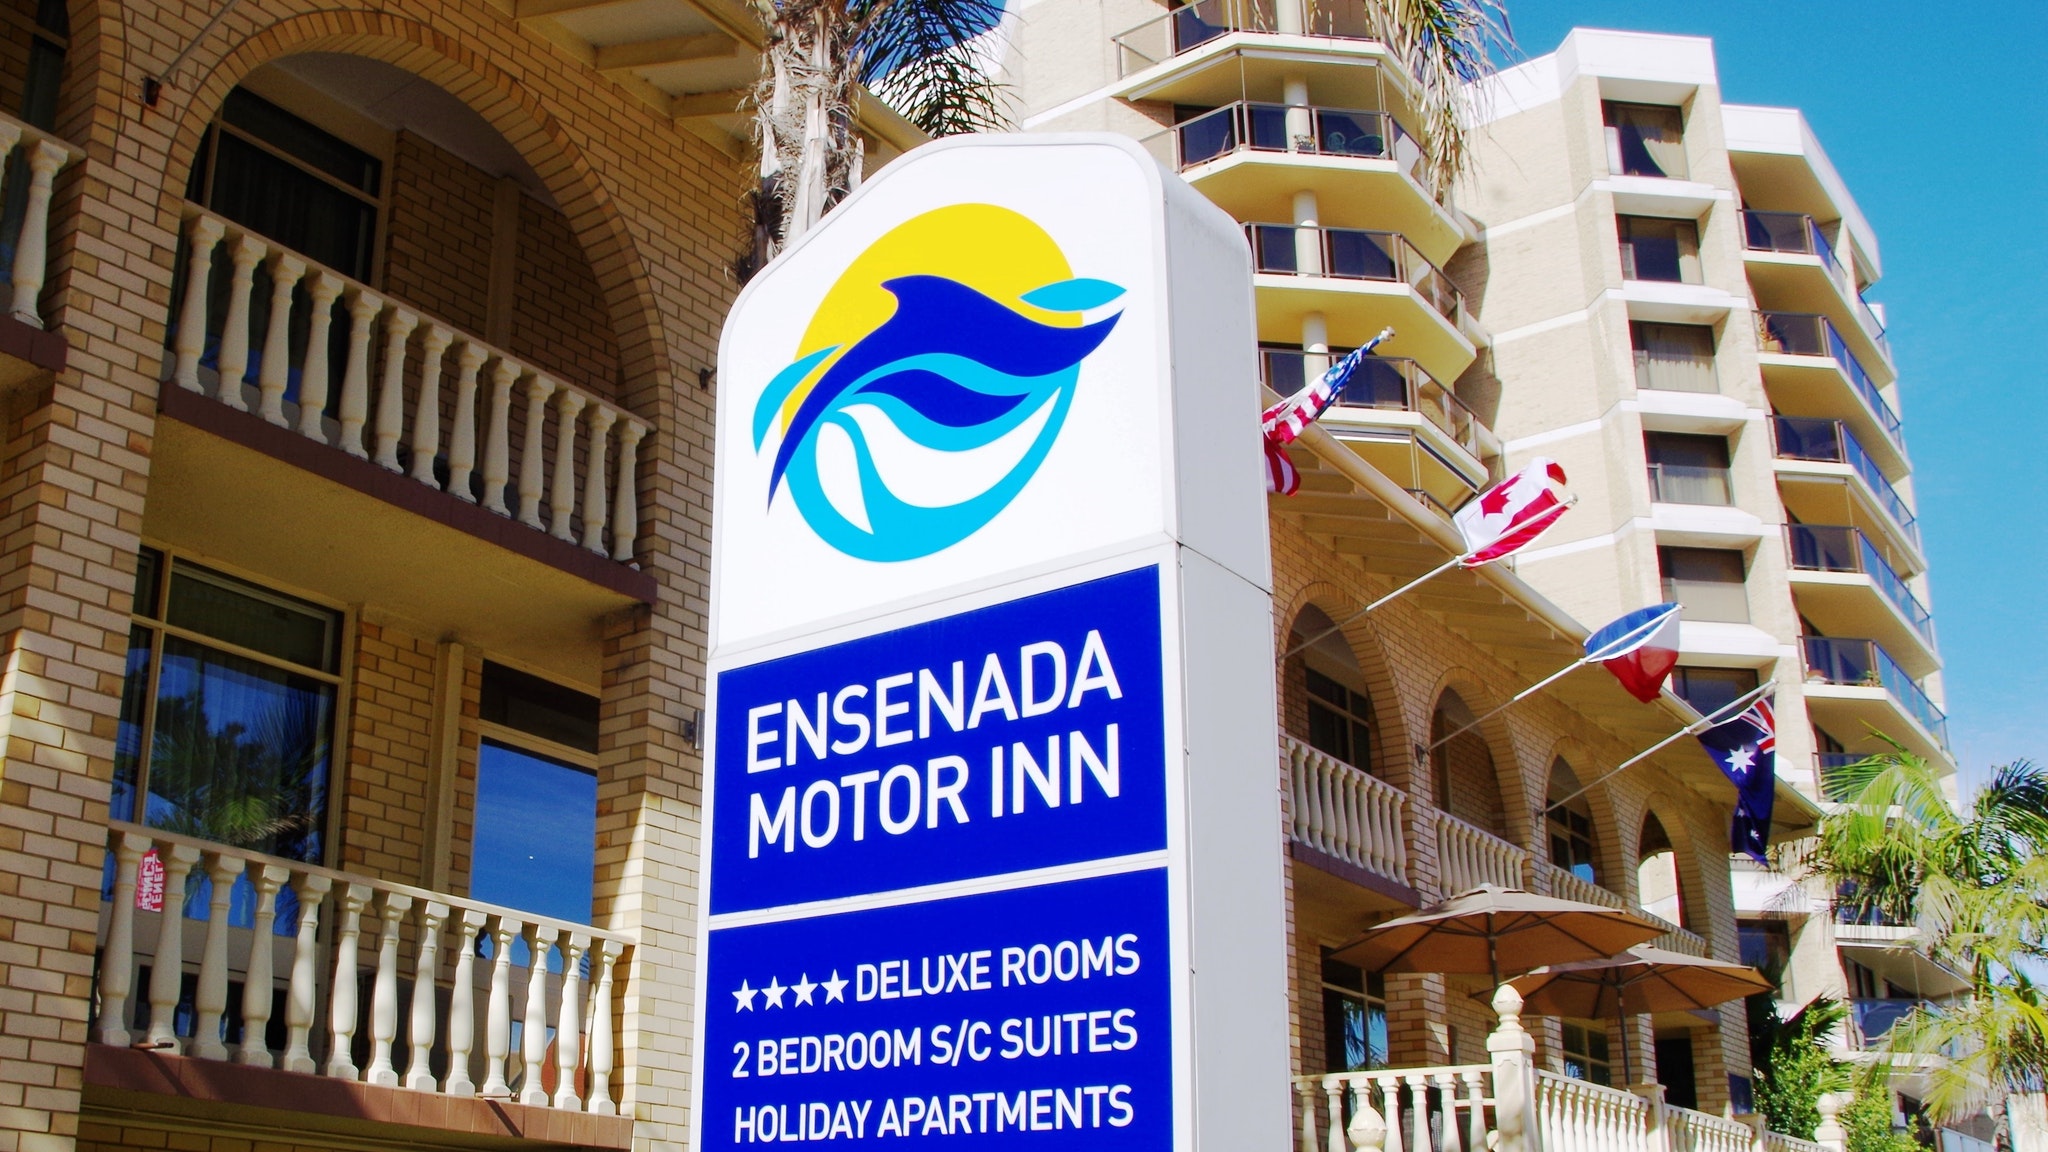 Ensenada Motor Inn And Suites - Accommodation in Surfers Paradise 10